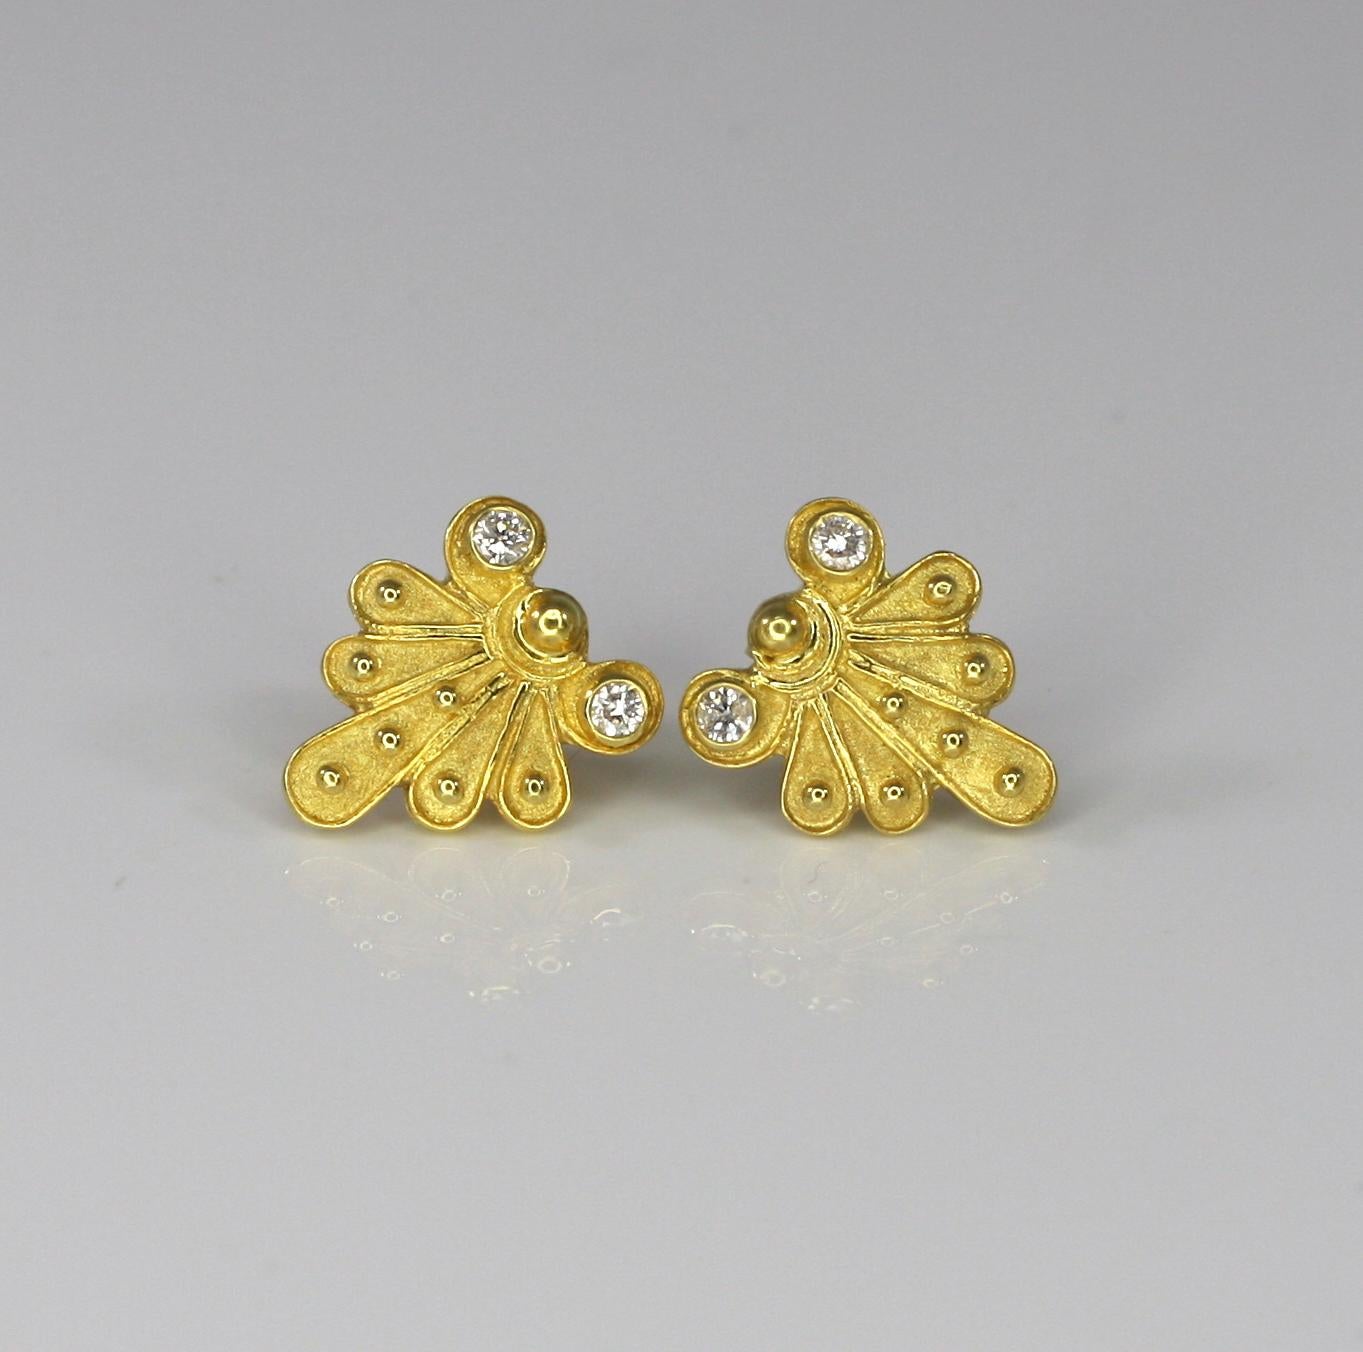 This S.Georgios designer Earring is 18 Karat yellow gold all handmade. The earrings are microscopically decorated with granulation workmanship and feature the unique velvet look on the background. These earrings carry 4 Brilliant cut Diamonds total